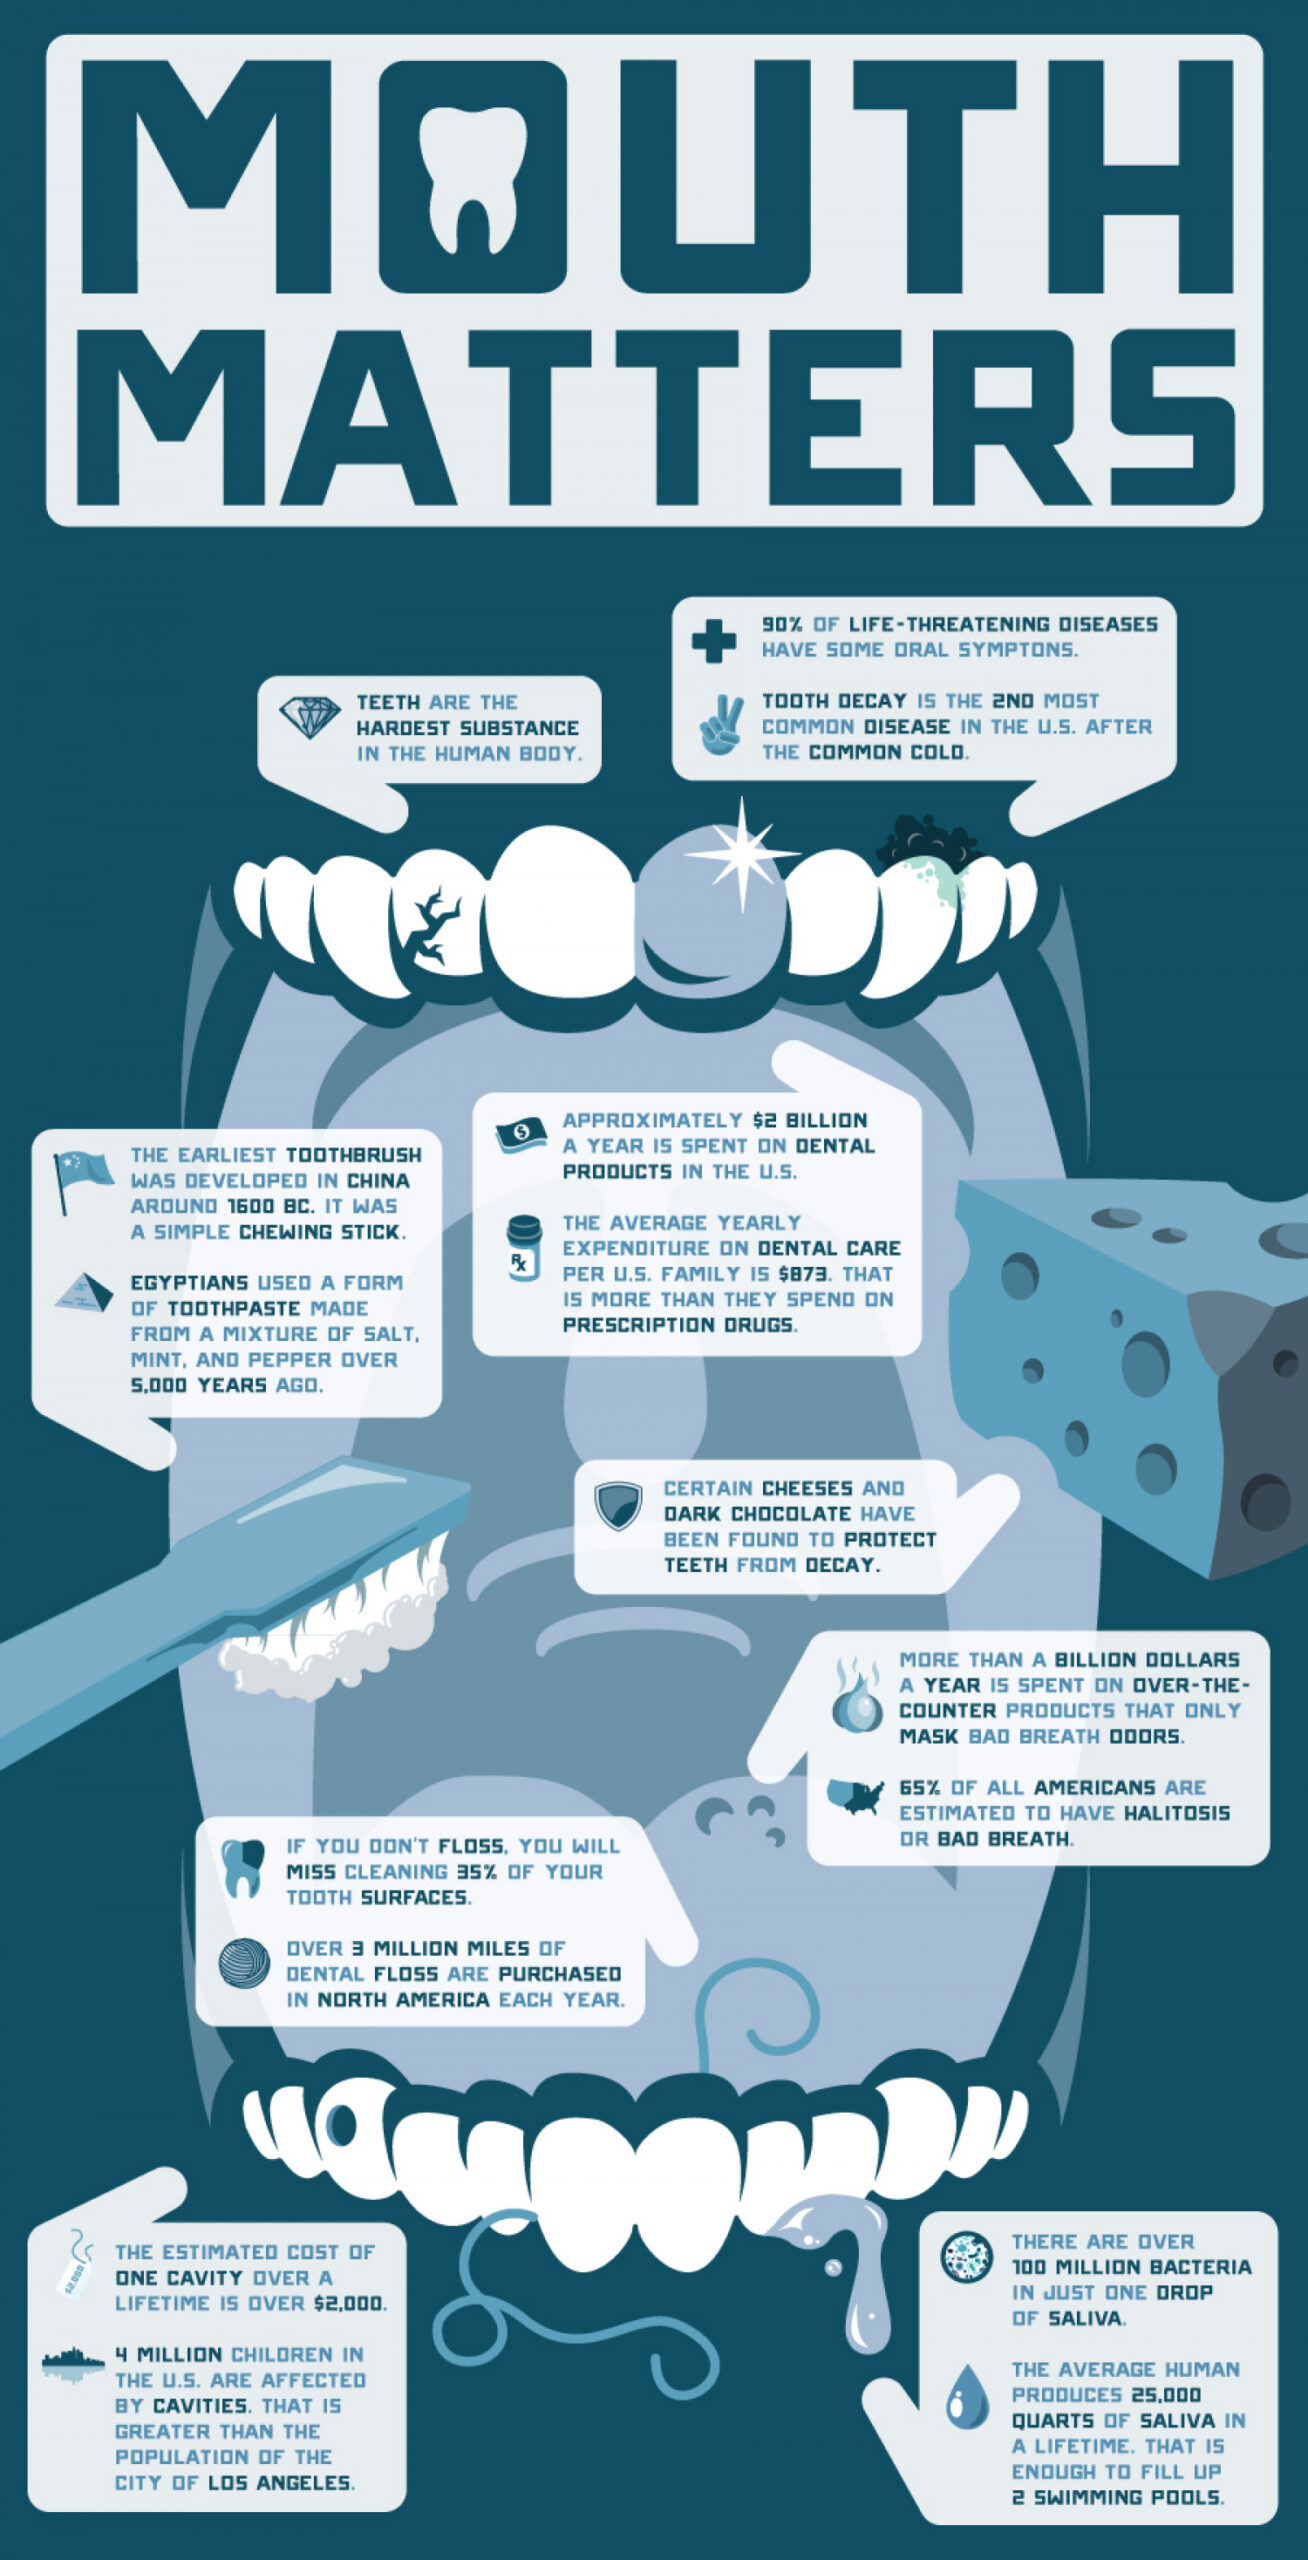 Life Stages of a Tooth #infographic - Visualistan